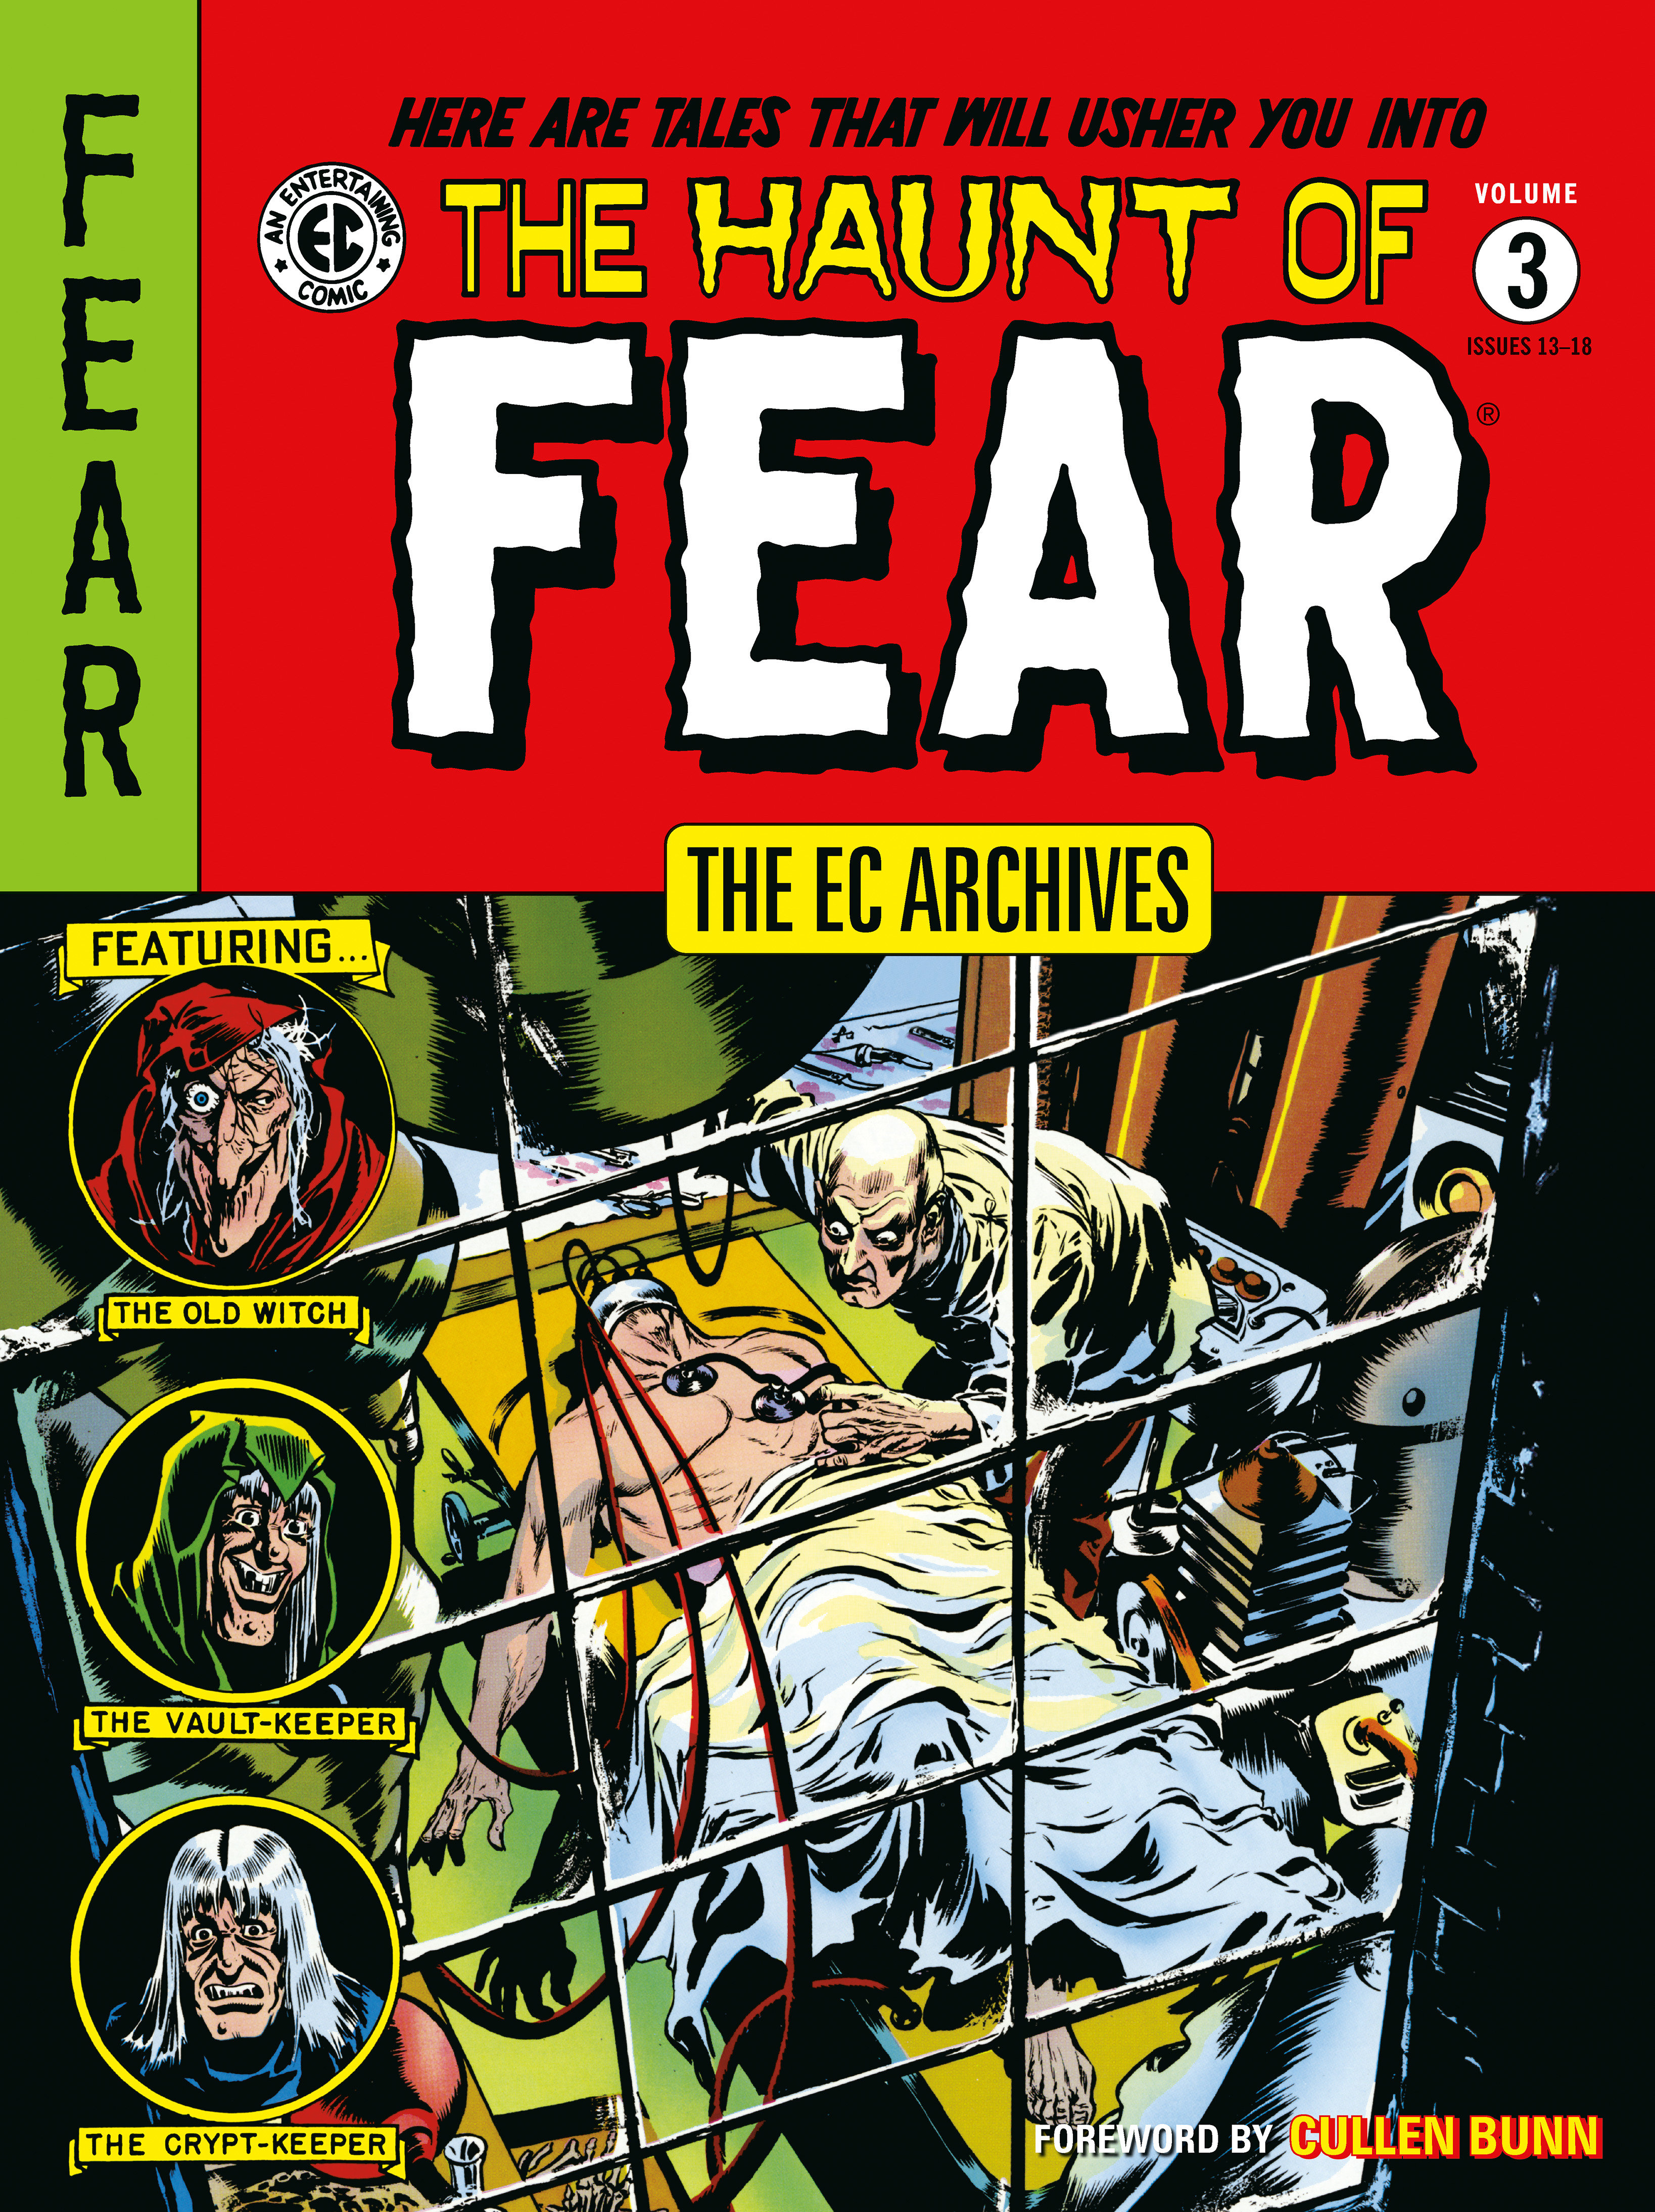 EC Archives the Haunt of Fear Graphic Novel 3